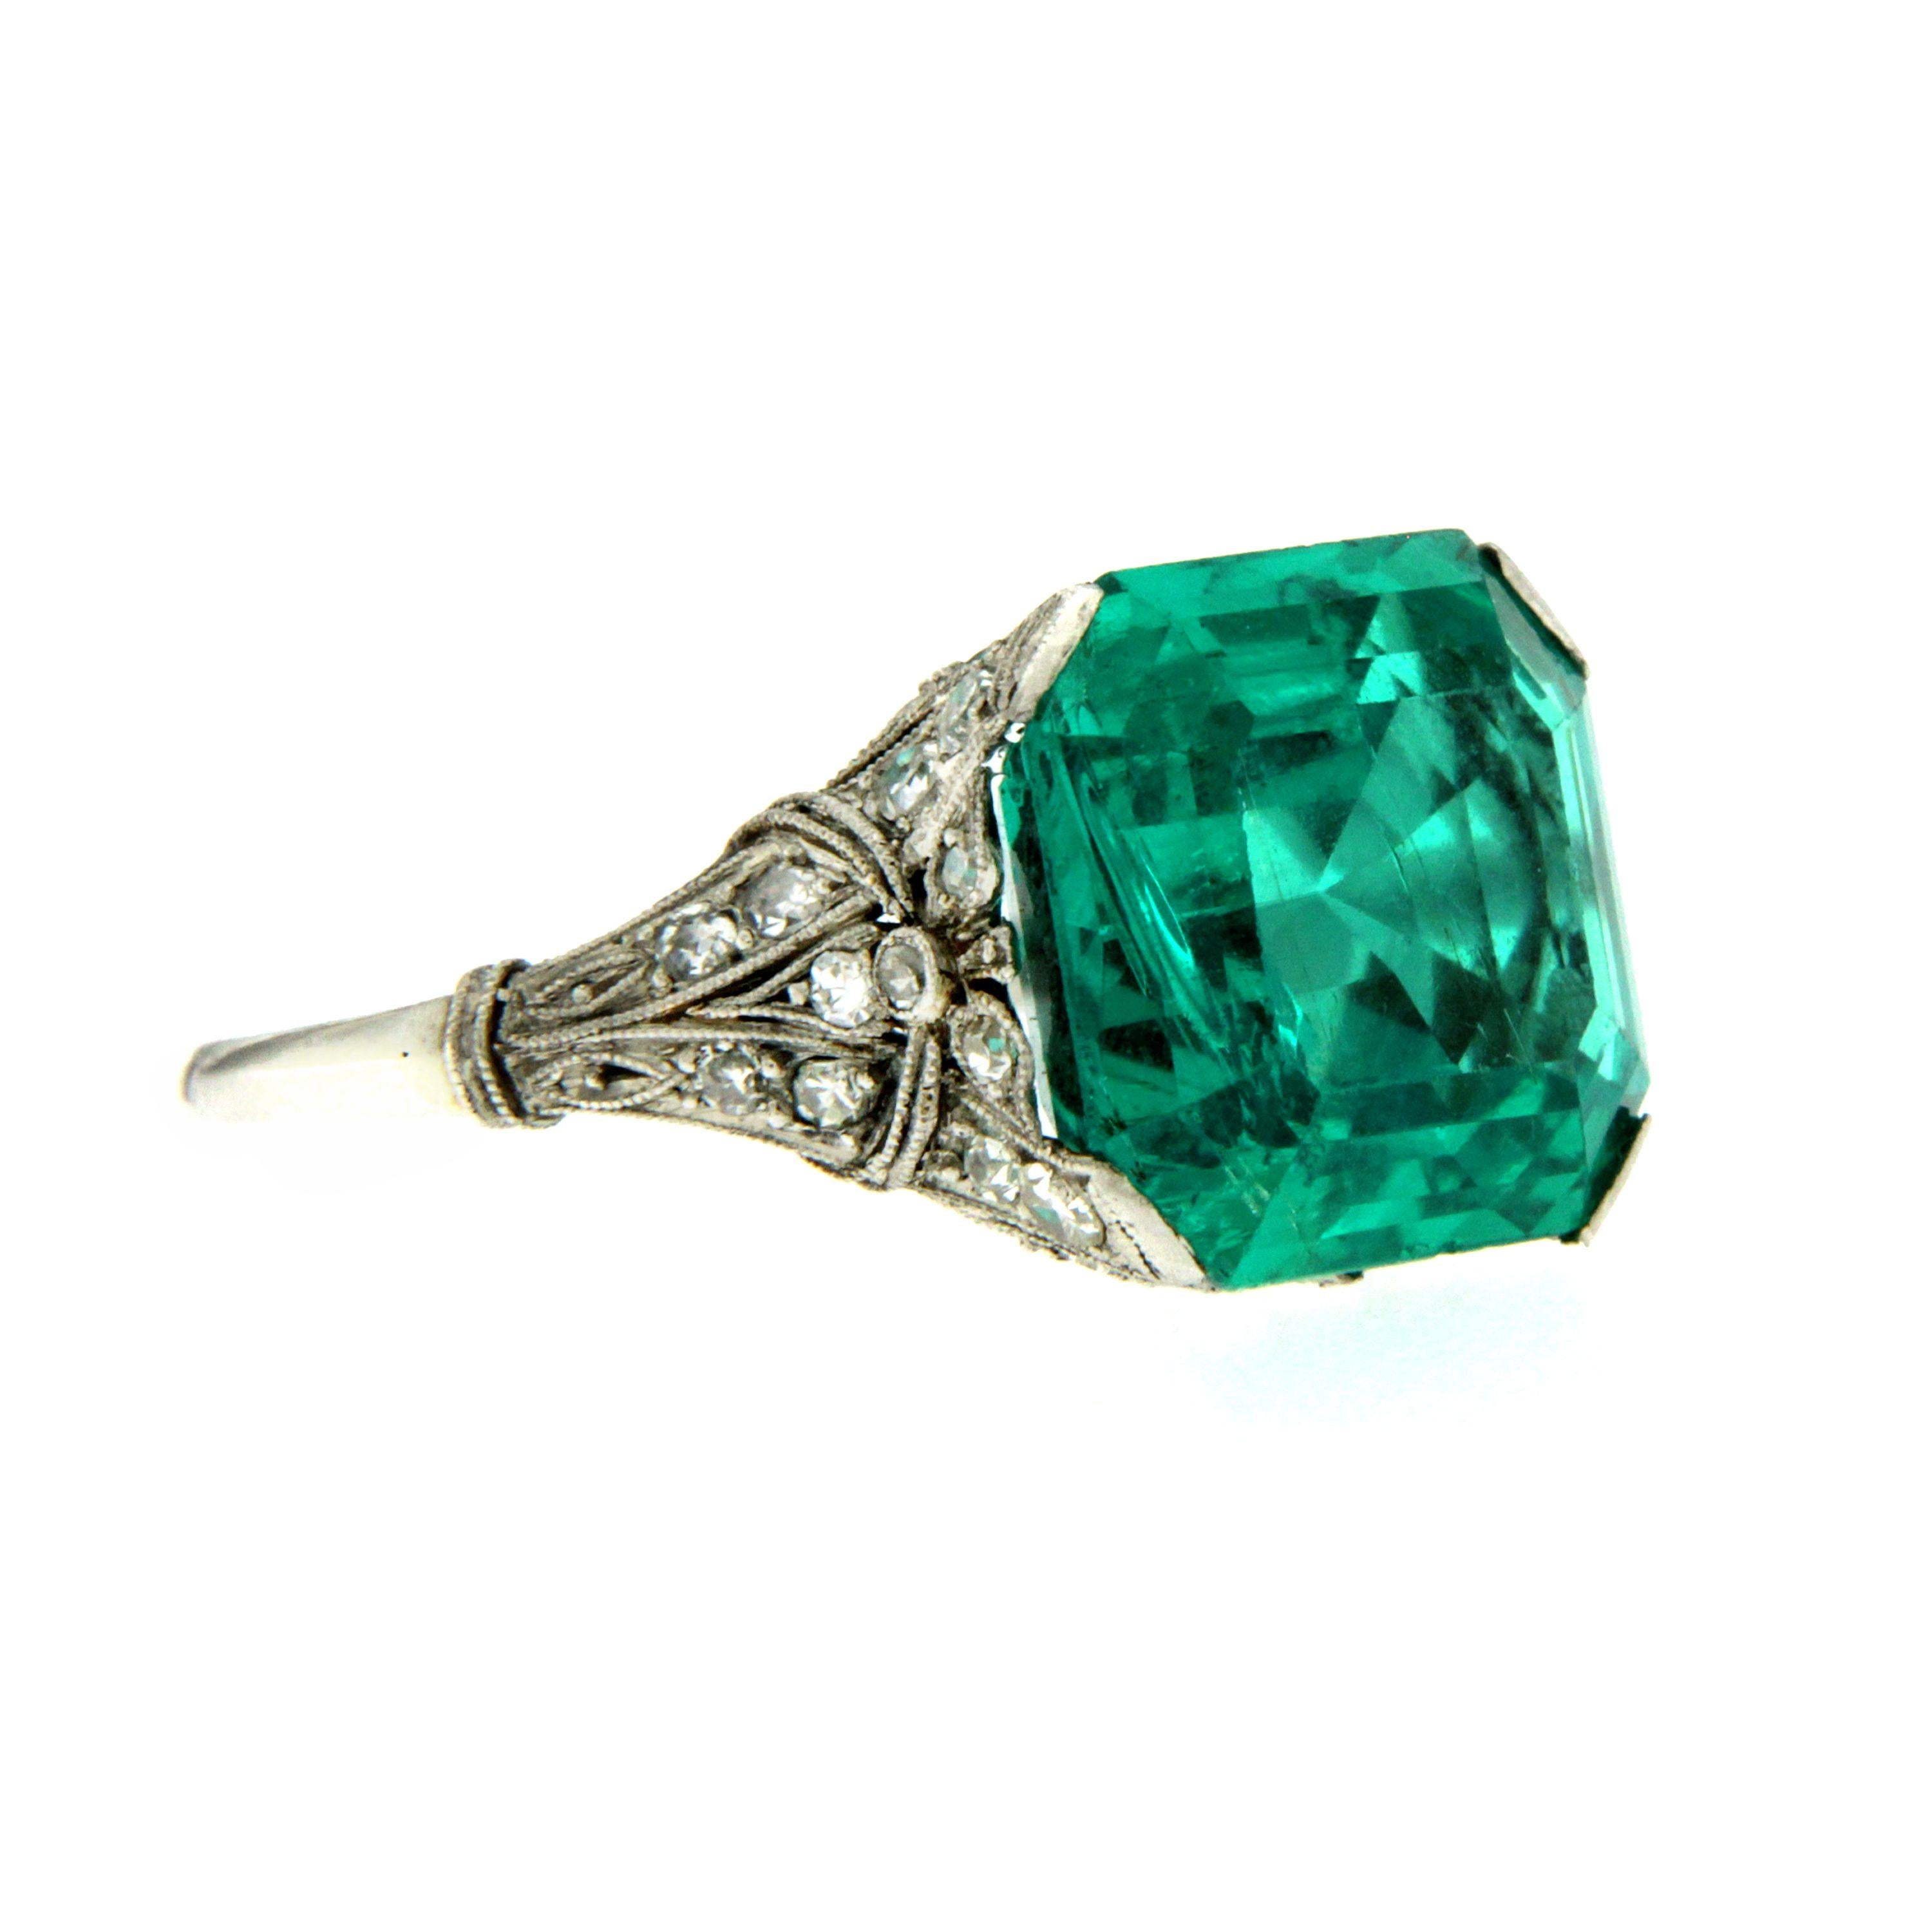 An exquisite filigree ring set in Platinum, authentic from Art Deco era, featuring a rare vivid 7.85 ct Emerald-cut Colombian Emerald, surrounded by 0,30 carats of old cut diamonds. 
The Emerald is accompanied by a SSEF certificate nr. 99311, Ssef